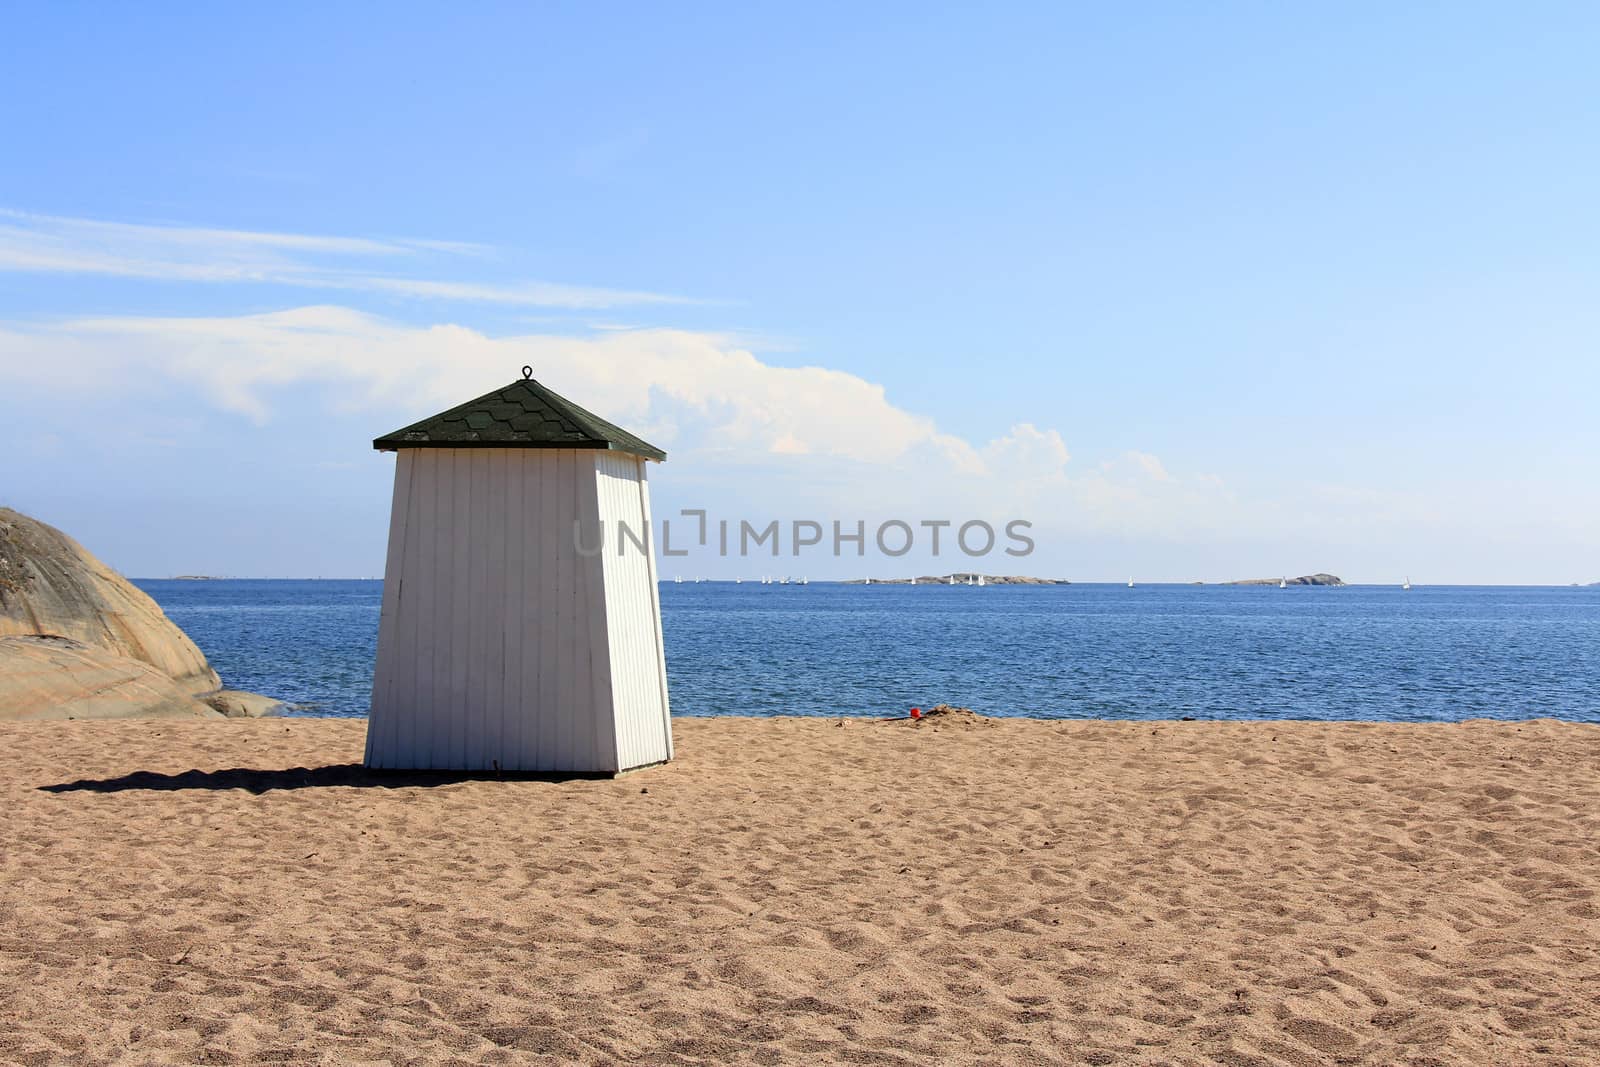 Wooden beach hut facing the blue sea and ships on the horizon in Hanko, Finland.